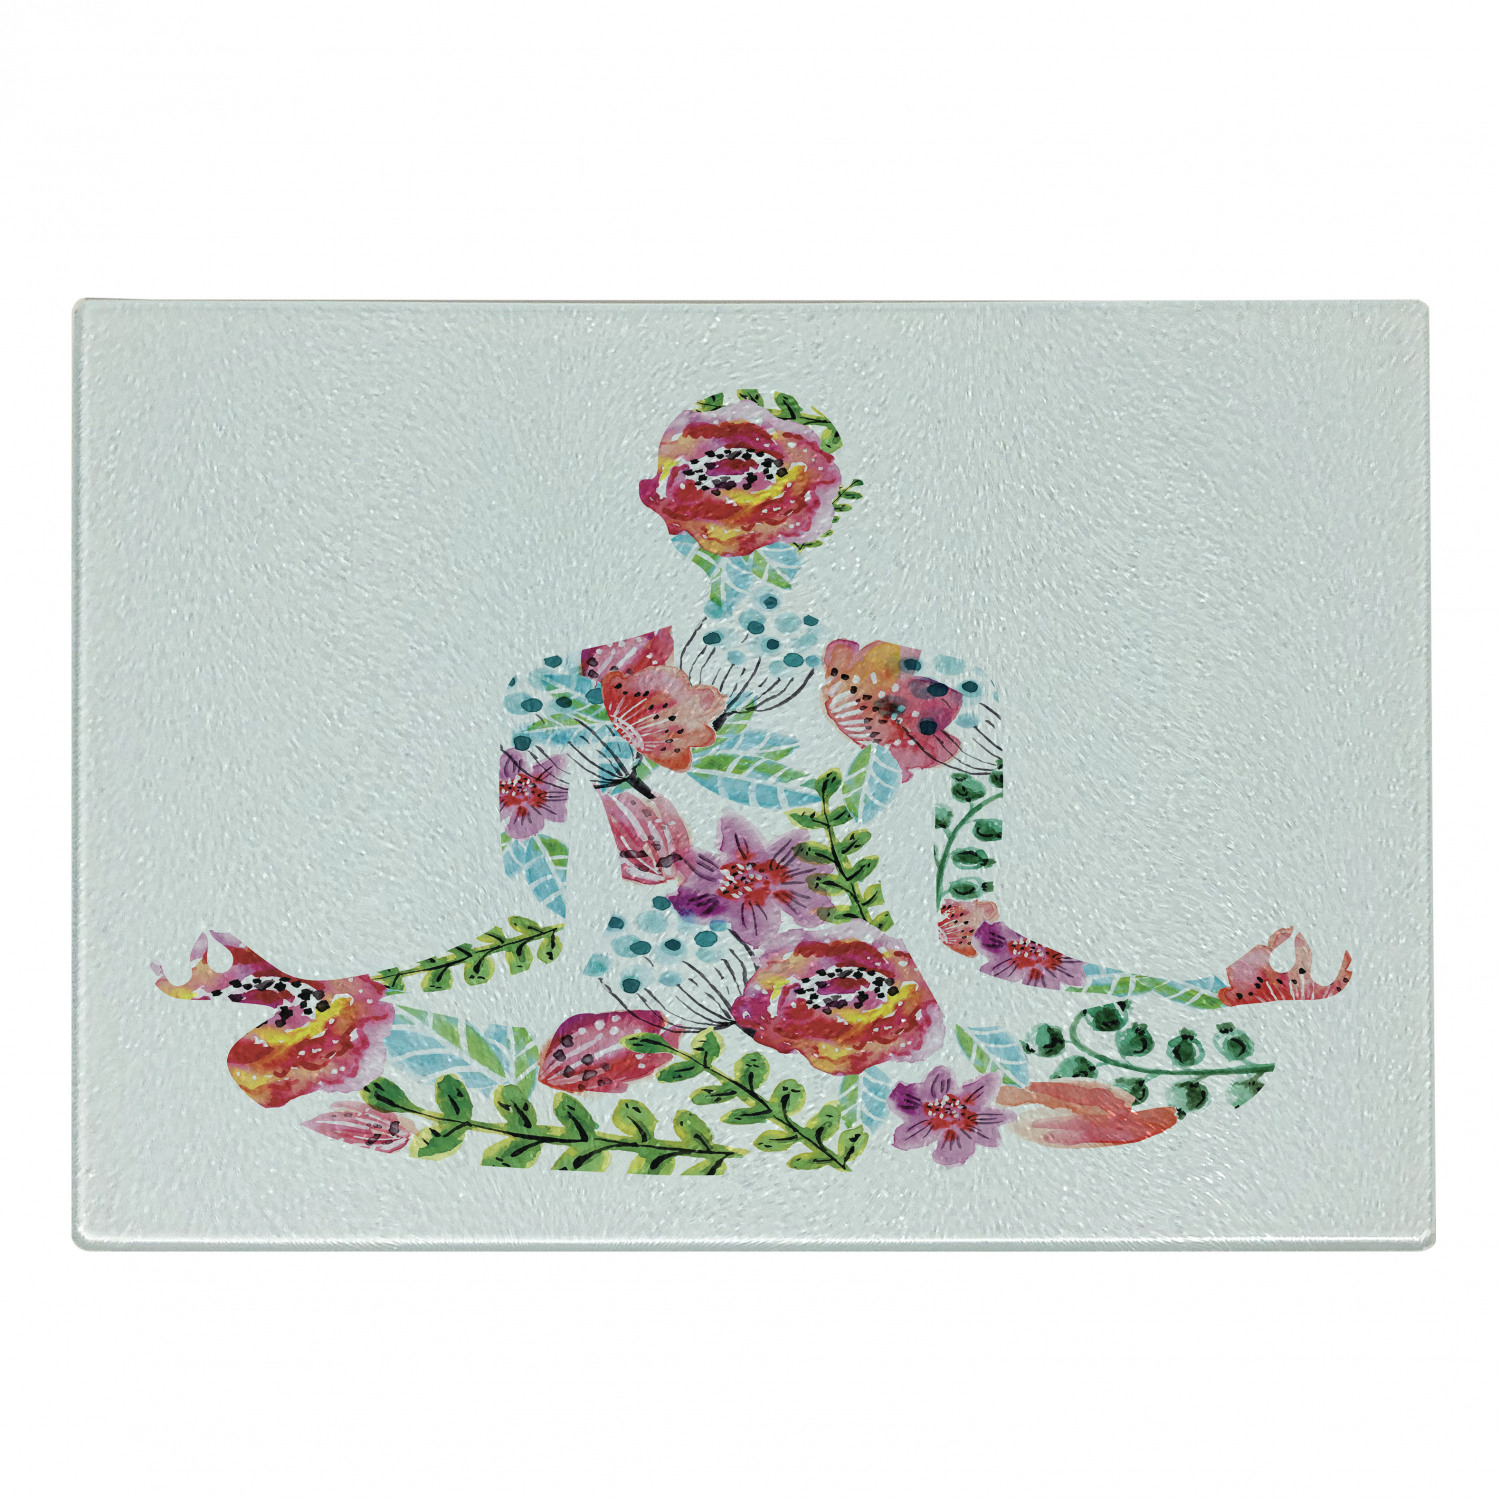 Yoga Cutting Board, Silhouette in Lotus Pose with Blooming Watercolor Flowers Green Leaves Body and Mind, Decorative Tempered Glass Cutting and Serving Board, Small Size, Multicolor, by Ambesonne - image 1 of 1